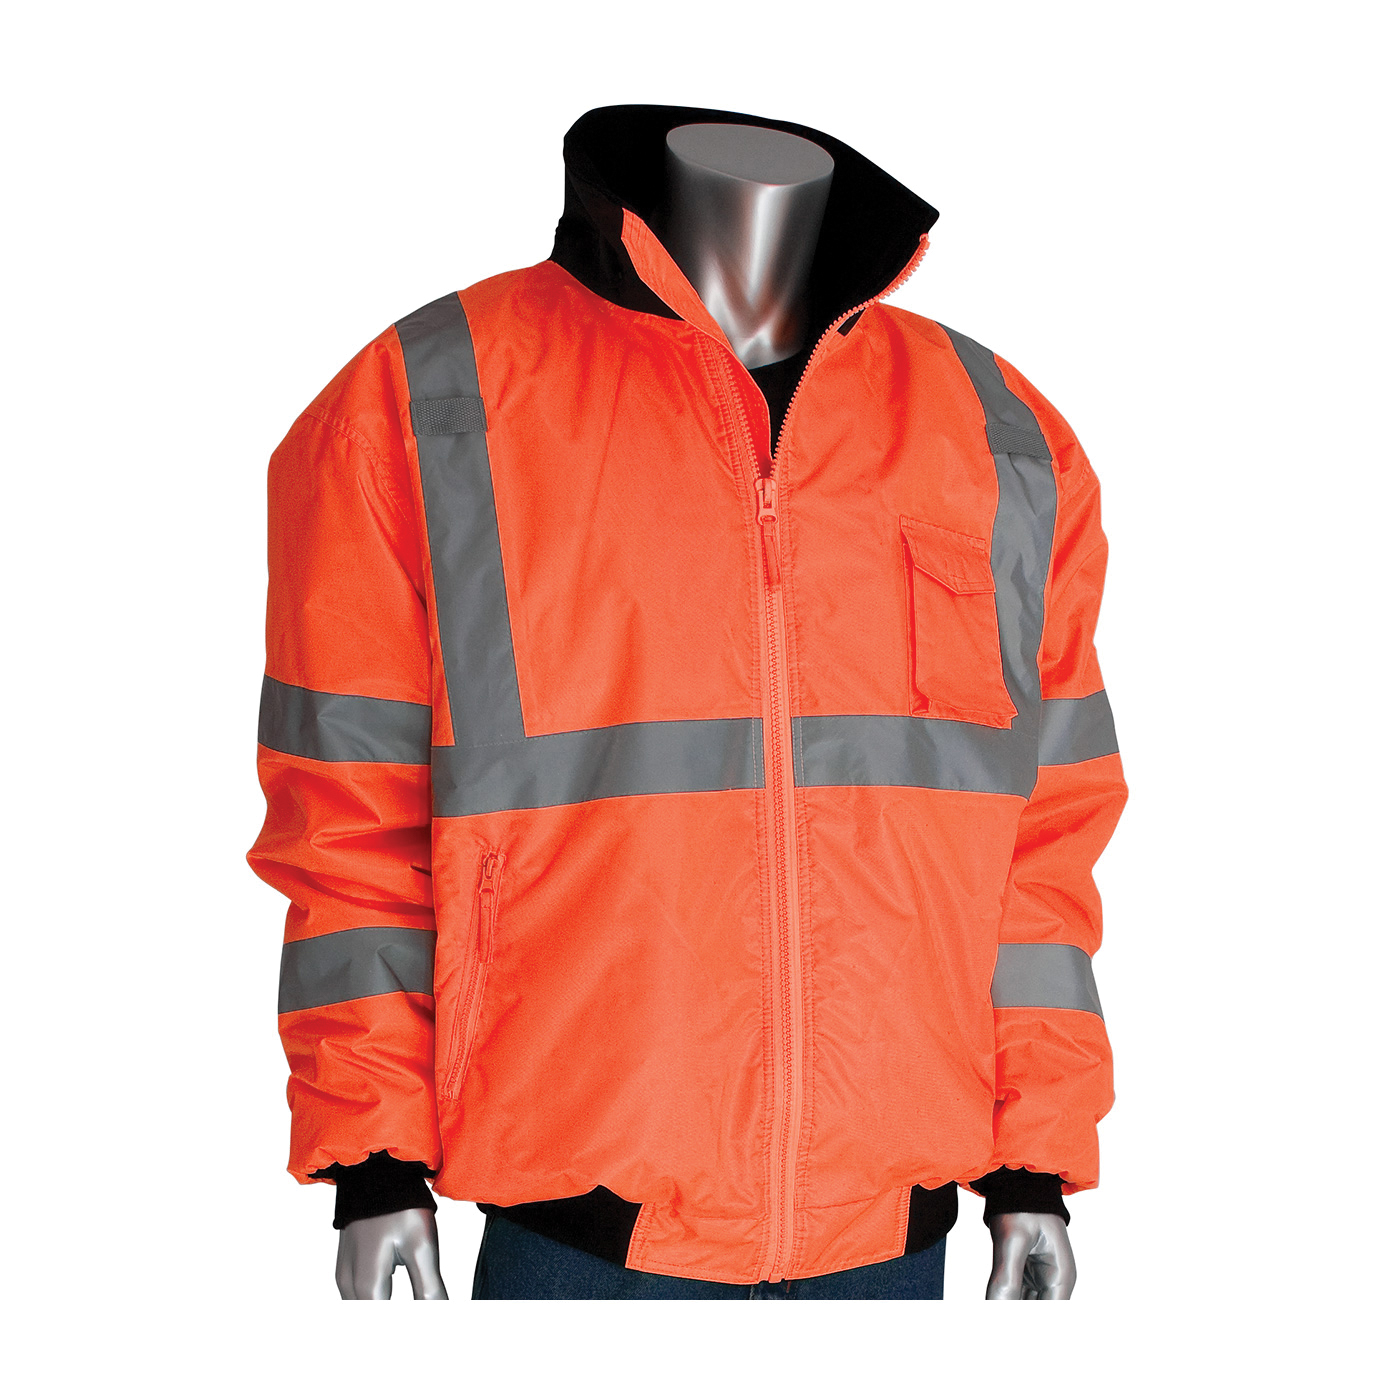 PIP® 333-1762-OR/L Bomber Jacket With Zip-Out Fleece Liner, Hi-Viz Lime Orange, Polyester, 56 in Chest, Resists: Water, Specifications Met: ANSI 107 Class 3 Type R